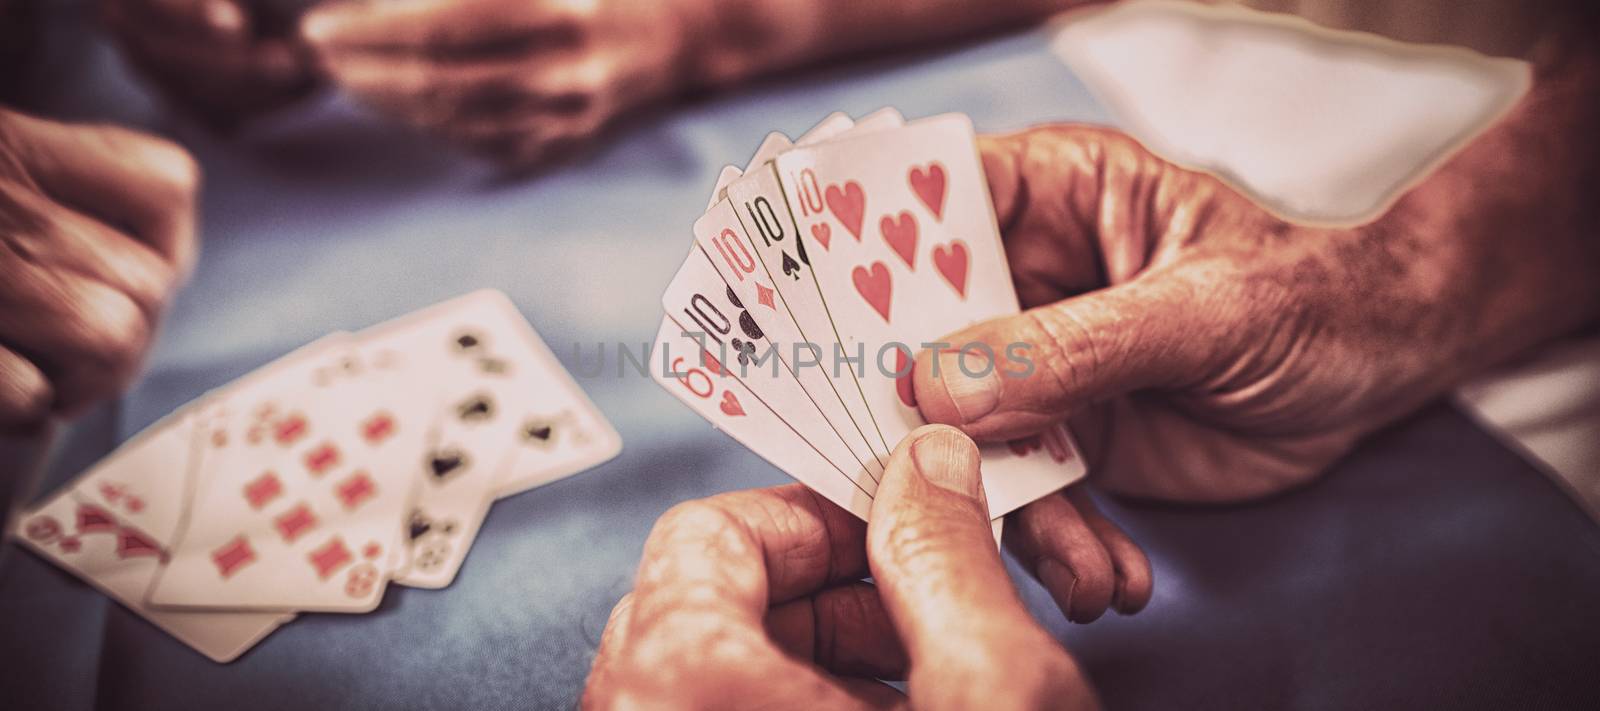 Group of seniors playing cards in the retirement house